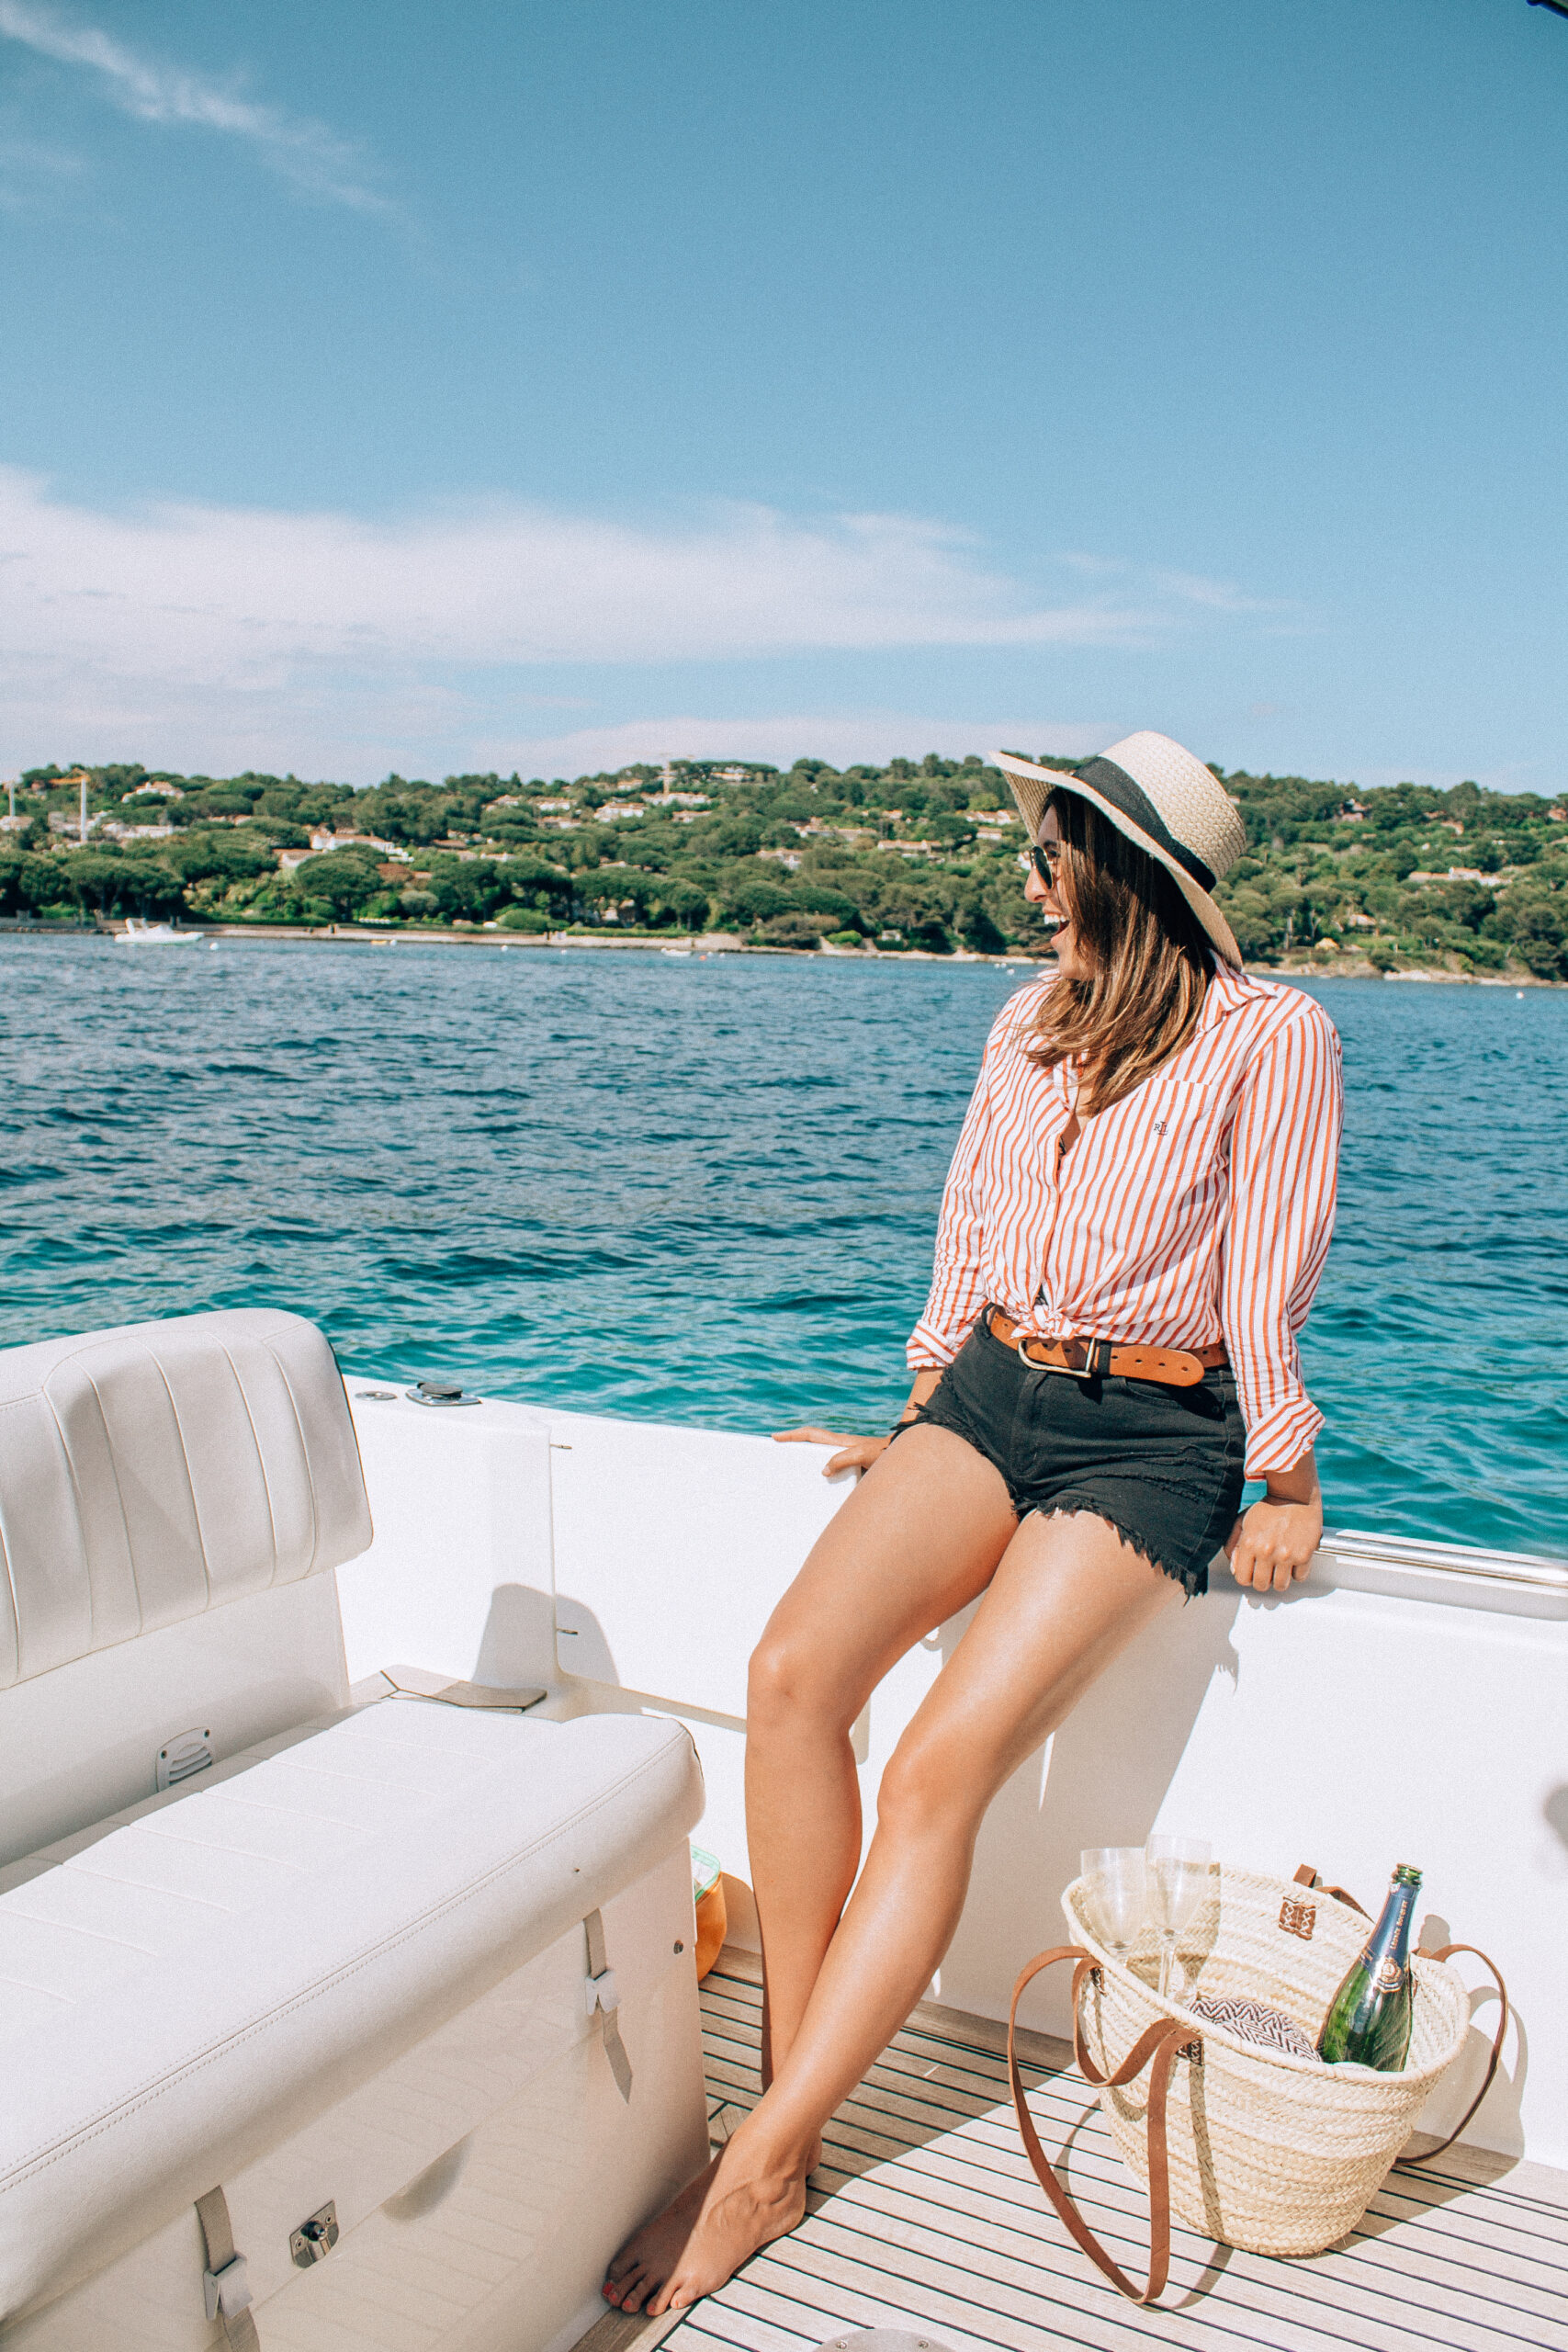 A lady on a boat in Saint Tropez looks happy and exciting while sailing around the blue waters and sips champaign